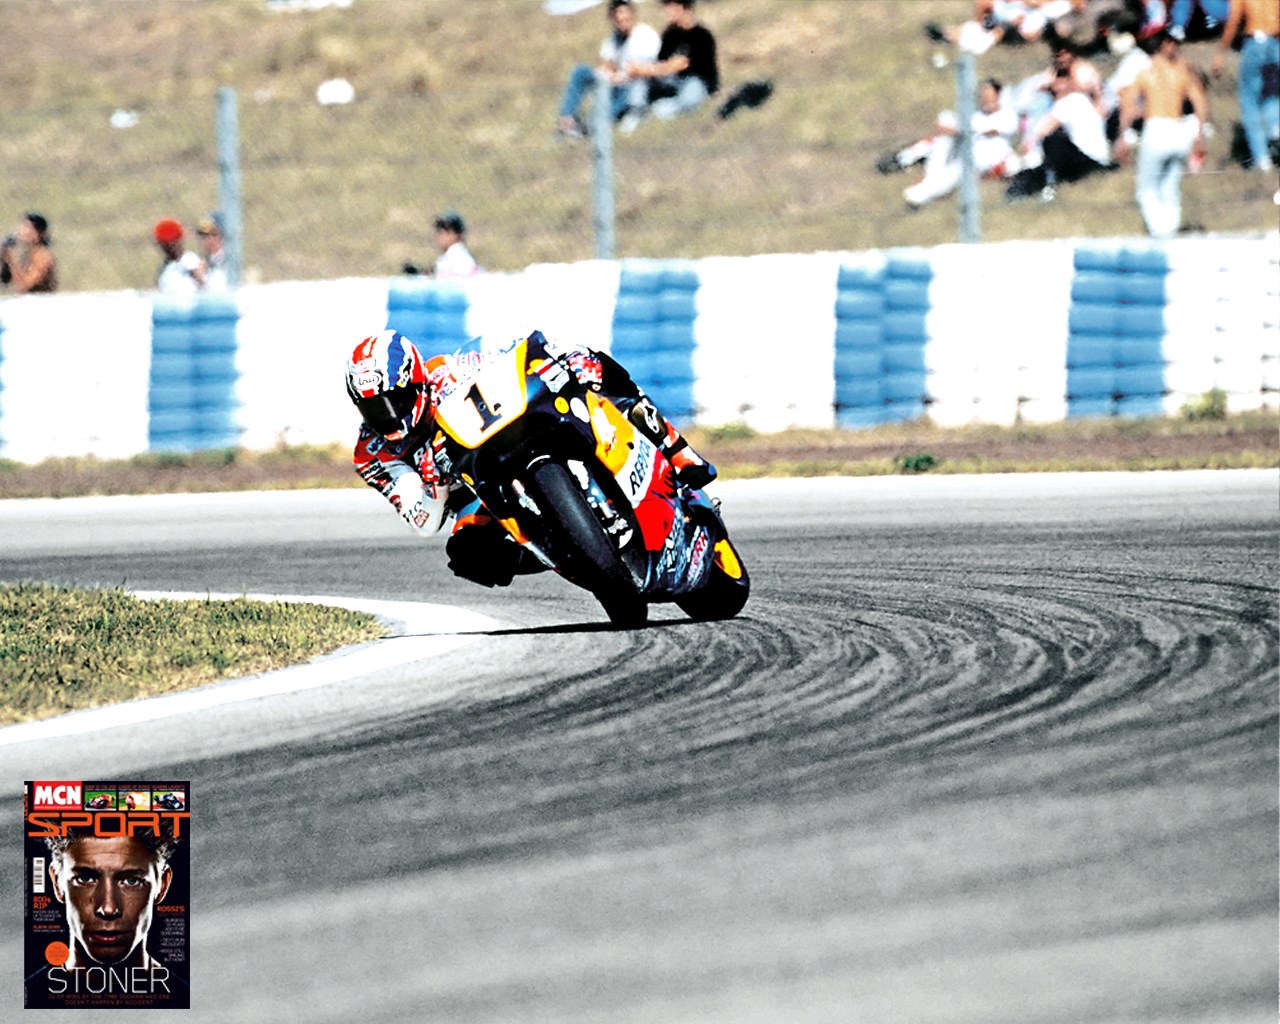 Get Your Epic Mcn Sport Wallpaper Here